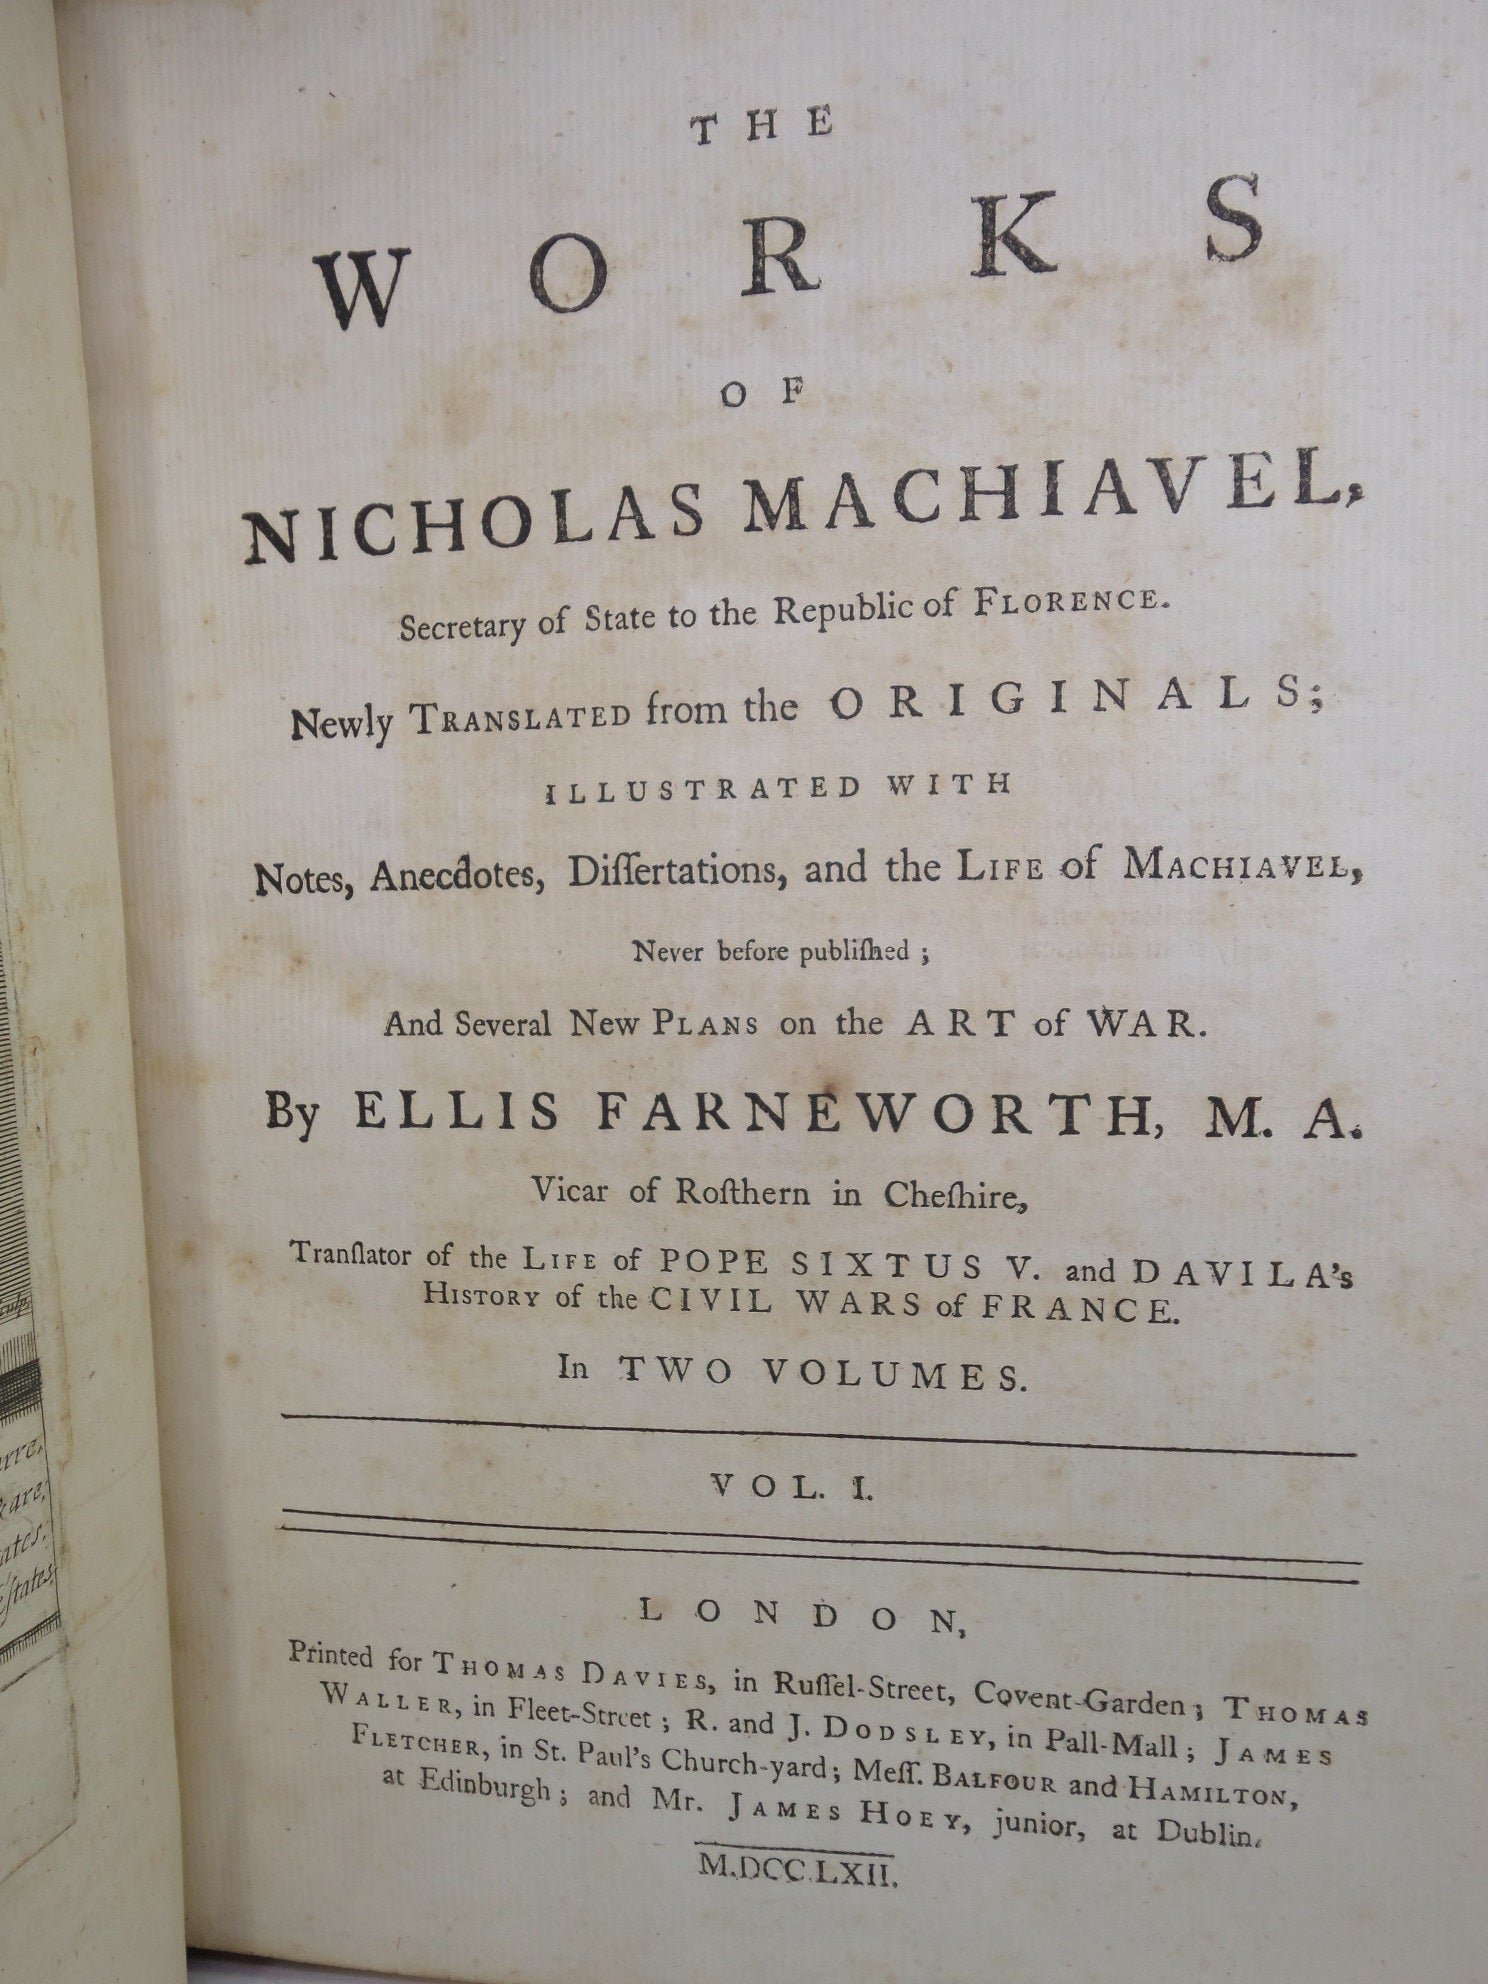 THE WORKS OF NICHOLAS MACHIAVELLI 1762 FINELY BOUND IN TWO VOLUMES